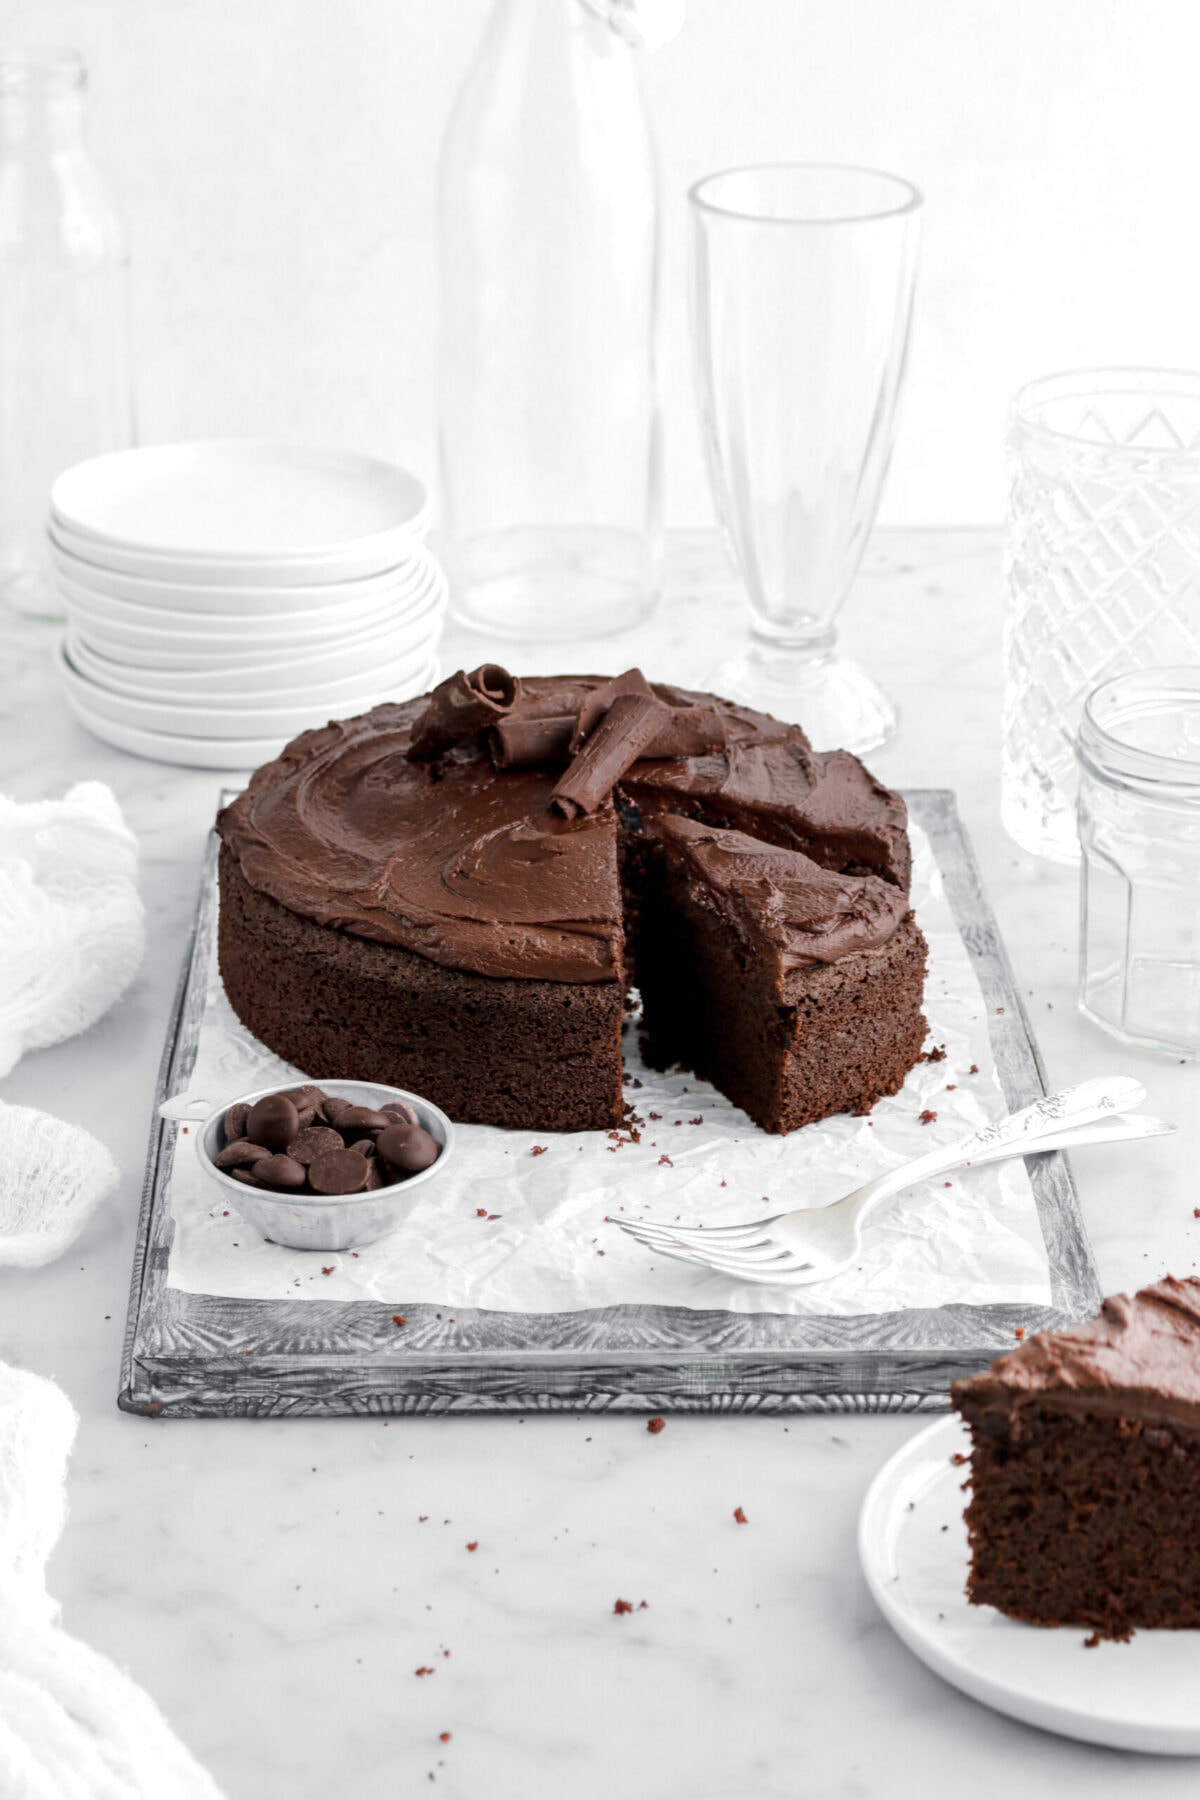 front shot of sliced chocolate fudge cake on upside down sheet pan with bowl of chocolate chips and forks beside and a plate with a slice of cake on white plate in front of cake with stack of plates and empty glasses behind on marble surface.